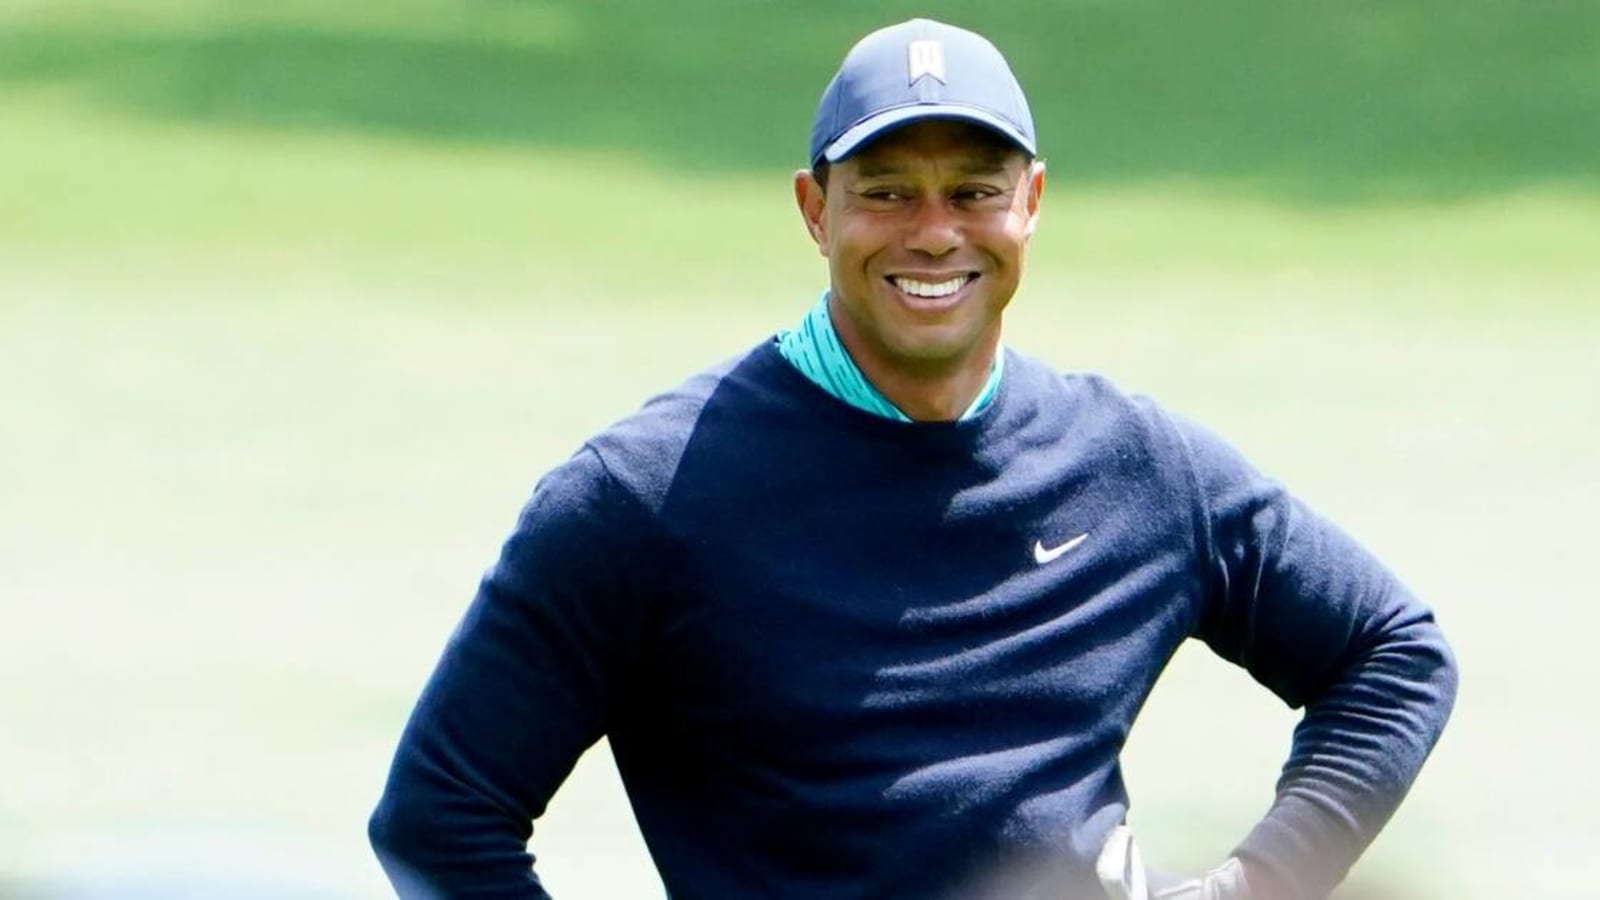 Tiger Woods says he can win The Masters ‘if everything comes together’